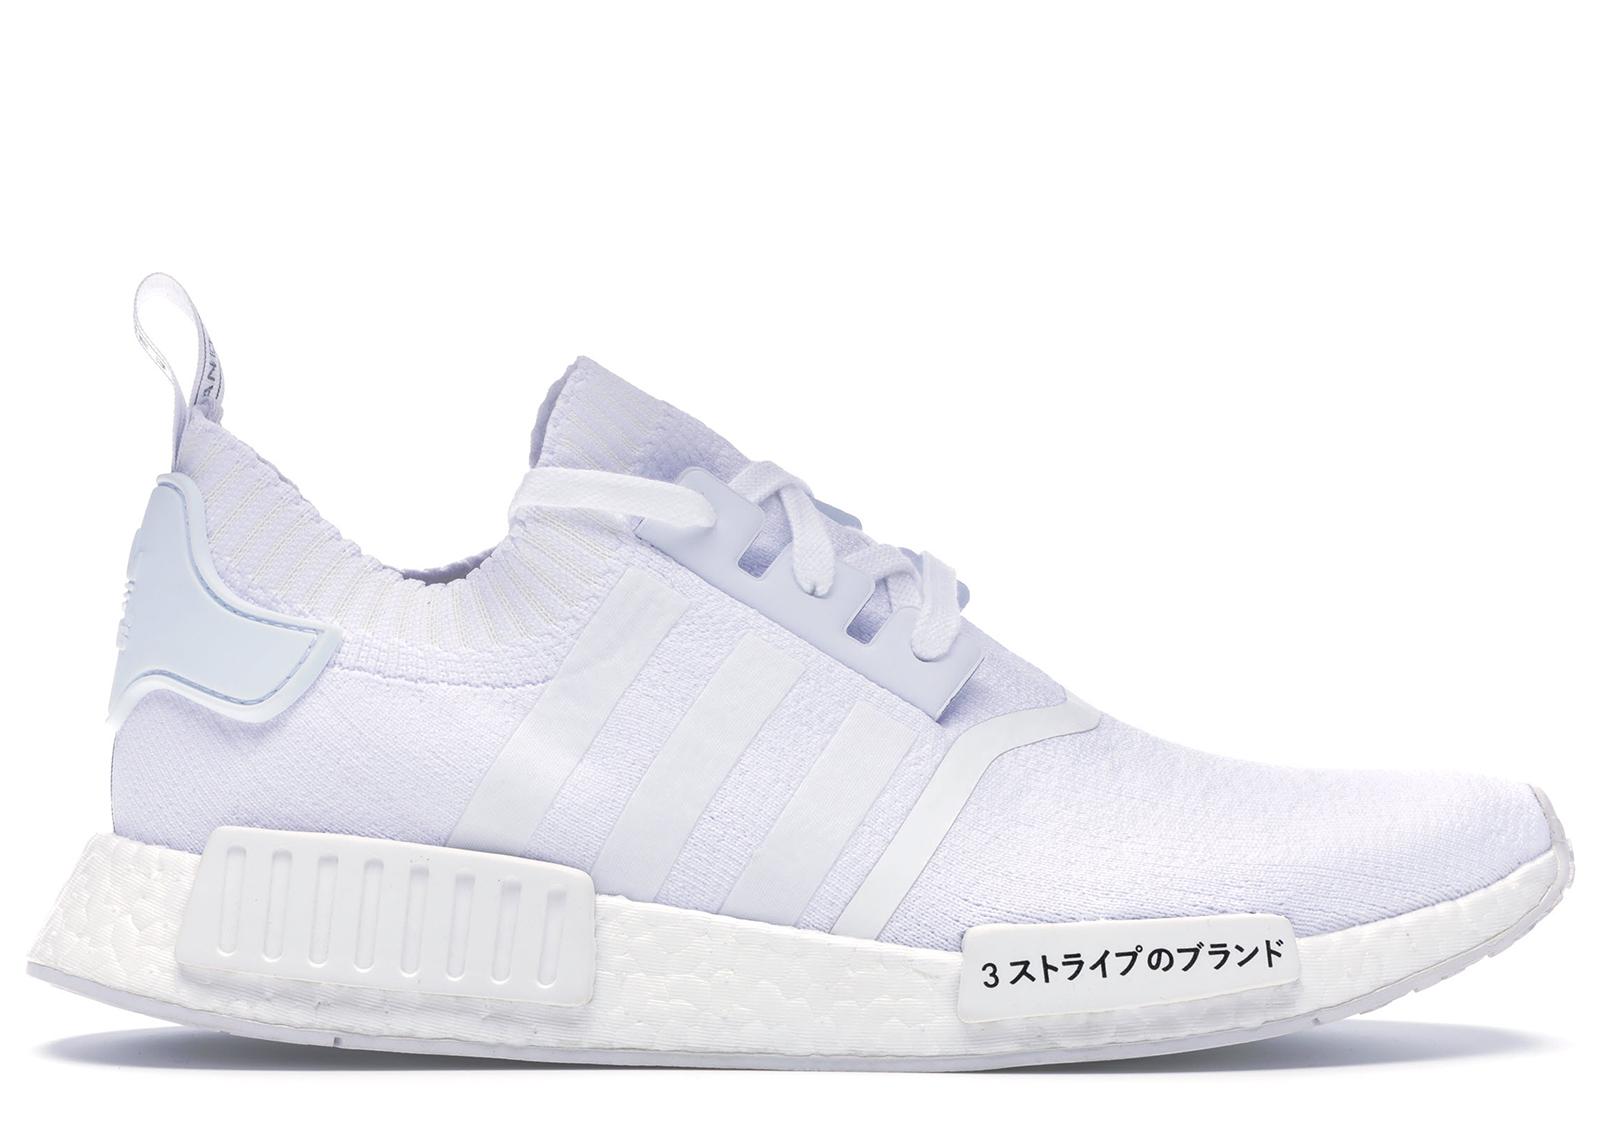 adidas Nmd R1 Japan Triple White for Men - Lyst